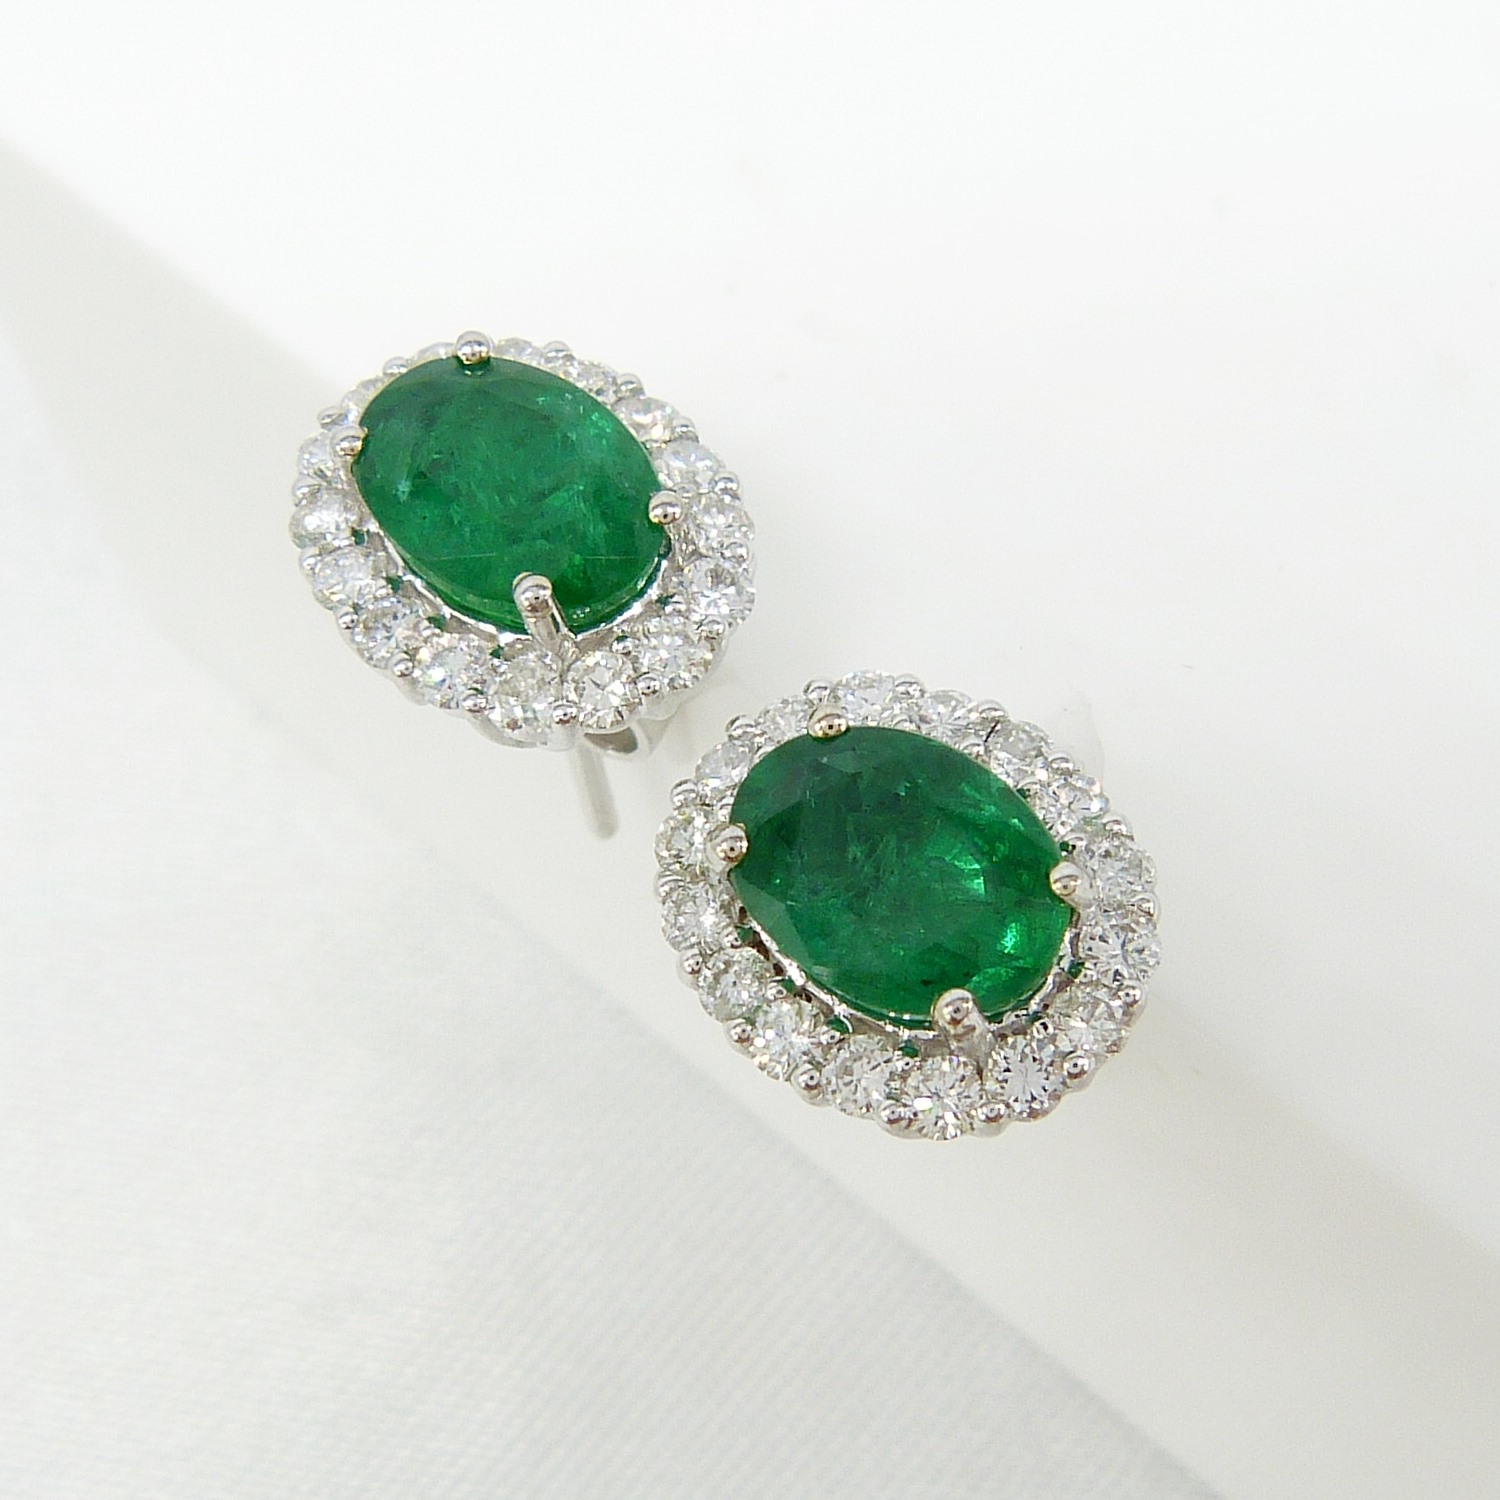 Pair of 18ct white gold 2.48 carat emerald and diamond halo ear studs, boxed - Image 8 of 8